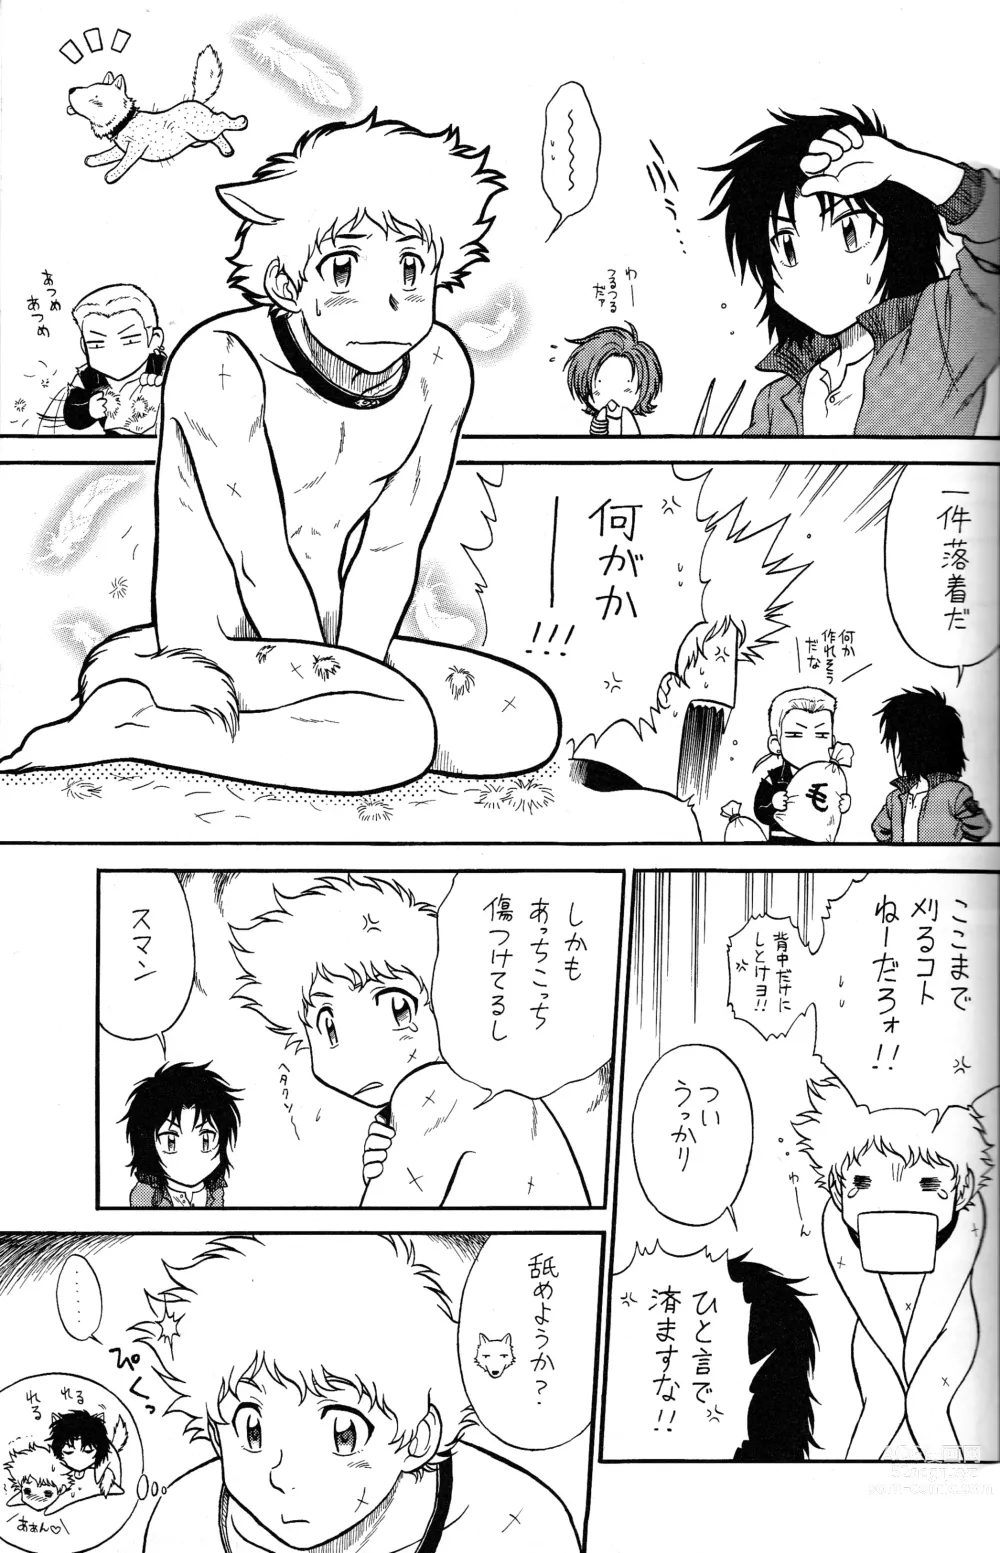 Page 5 of doujinshi K to H